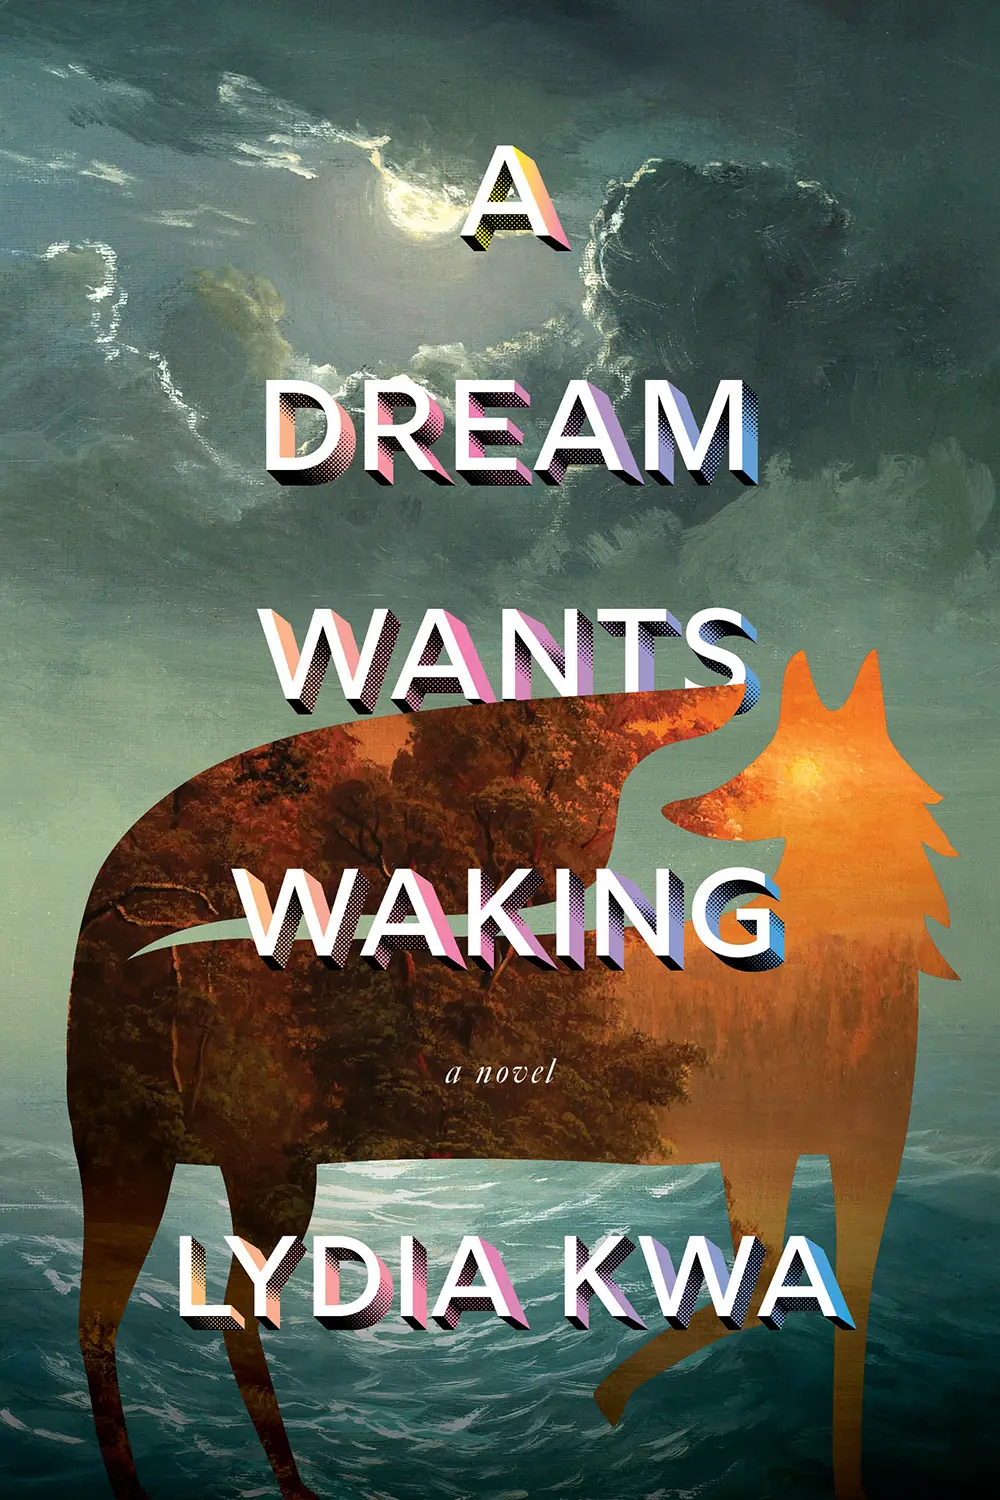 The cover of A Dream Wants Waking by Lydia Kwa.